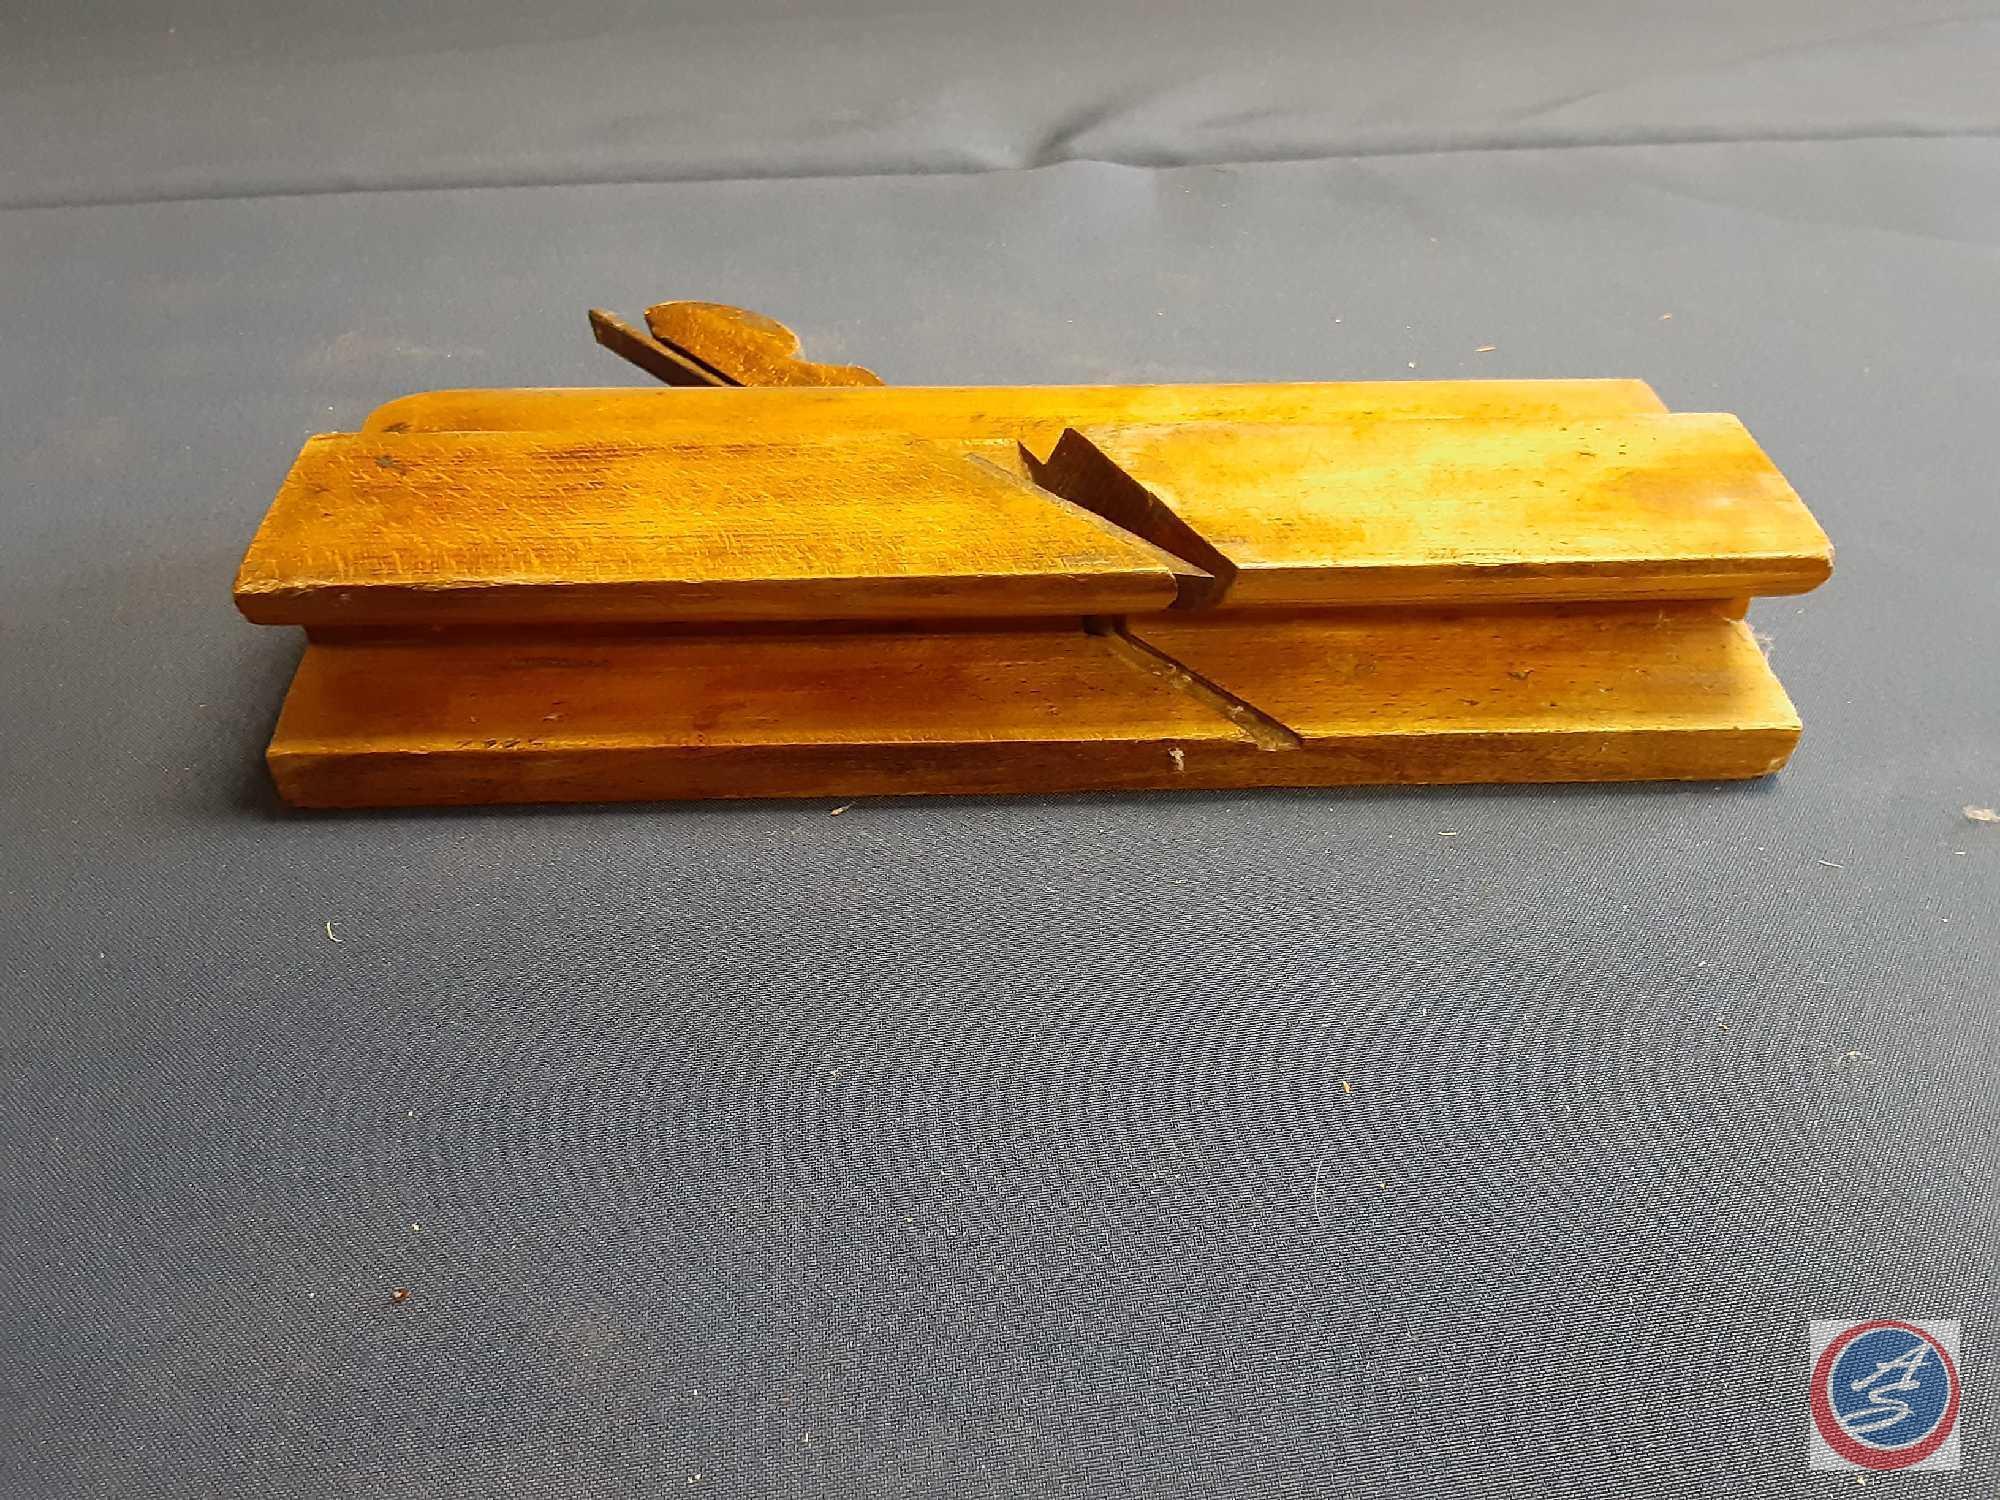 (3) Antique wood planes; (1) Greenfield Tool Co. Greenfield Mass 5/8 NO. 164, (1) A.G. Bartlett's